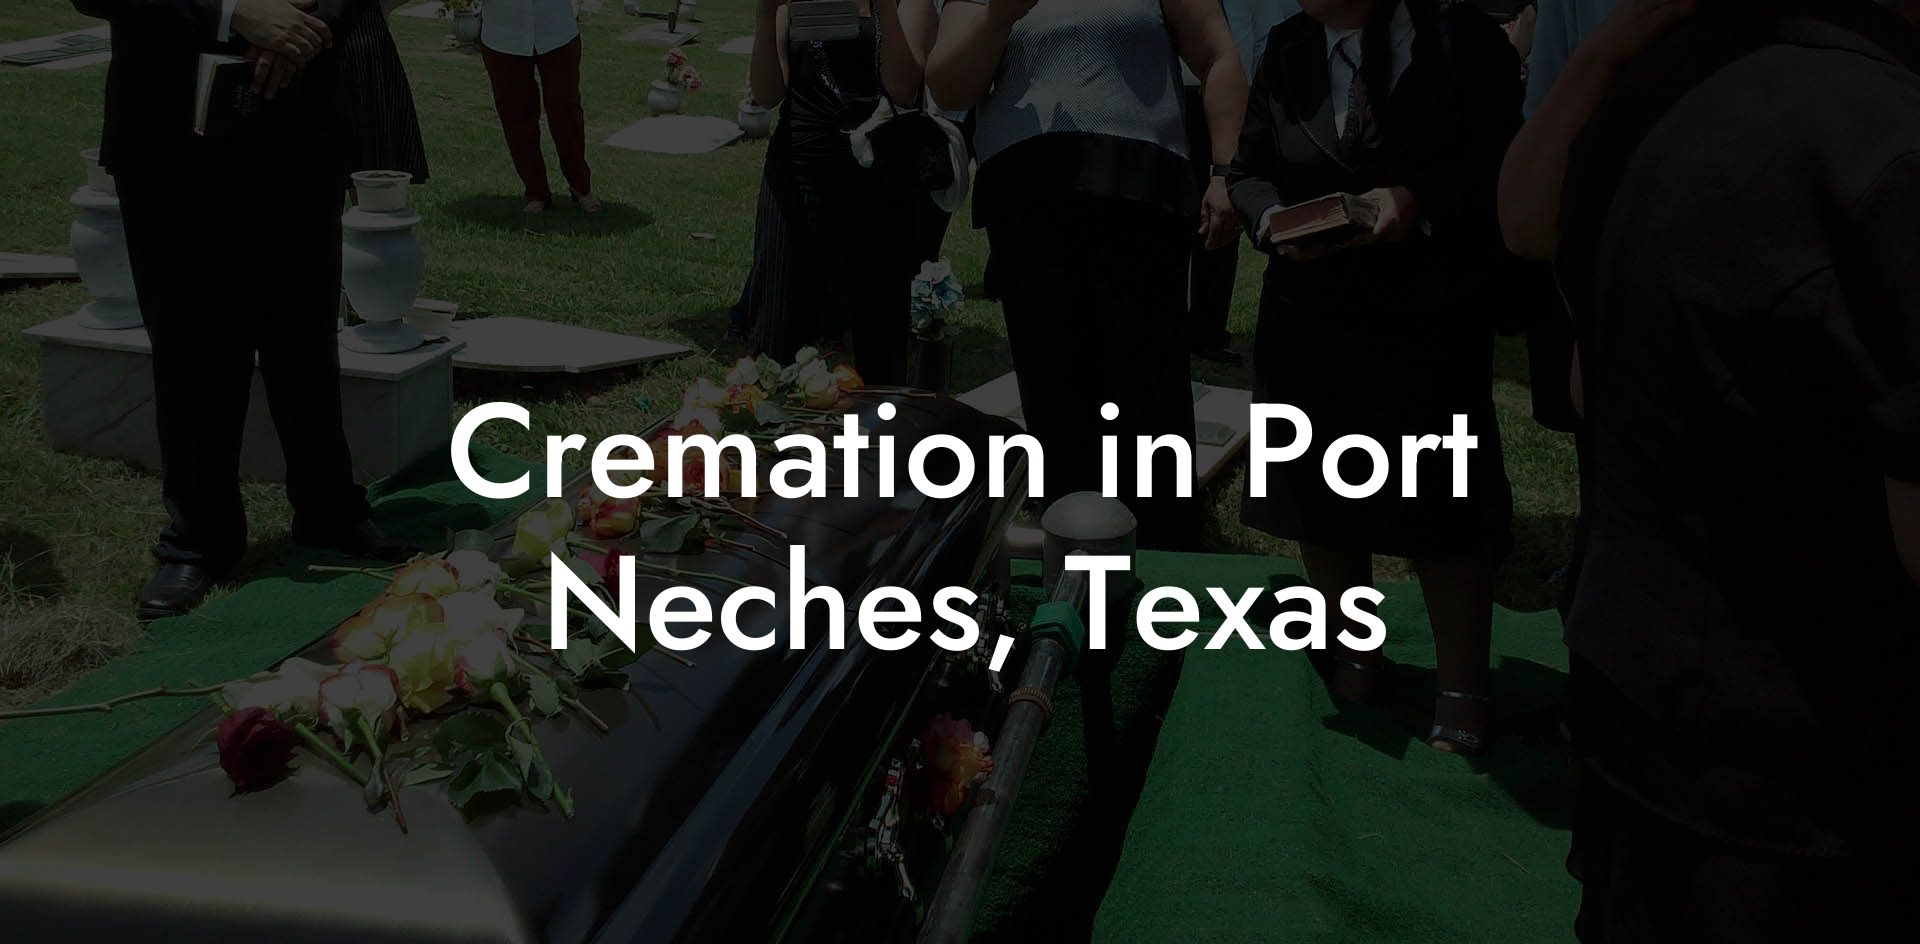 Cremation in Port Neches, Texas